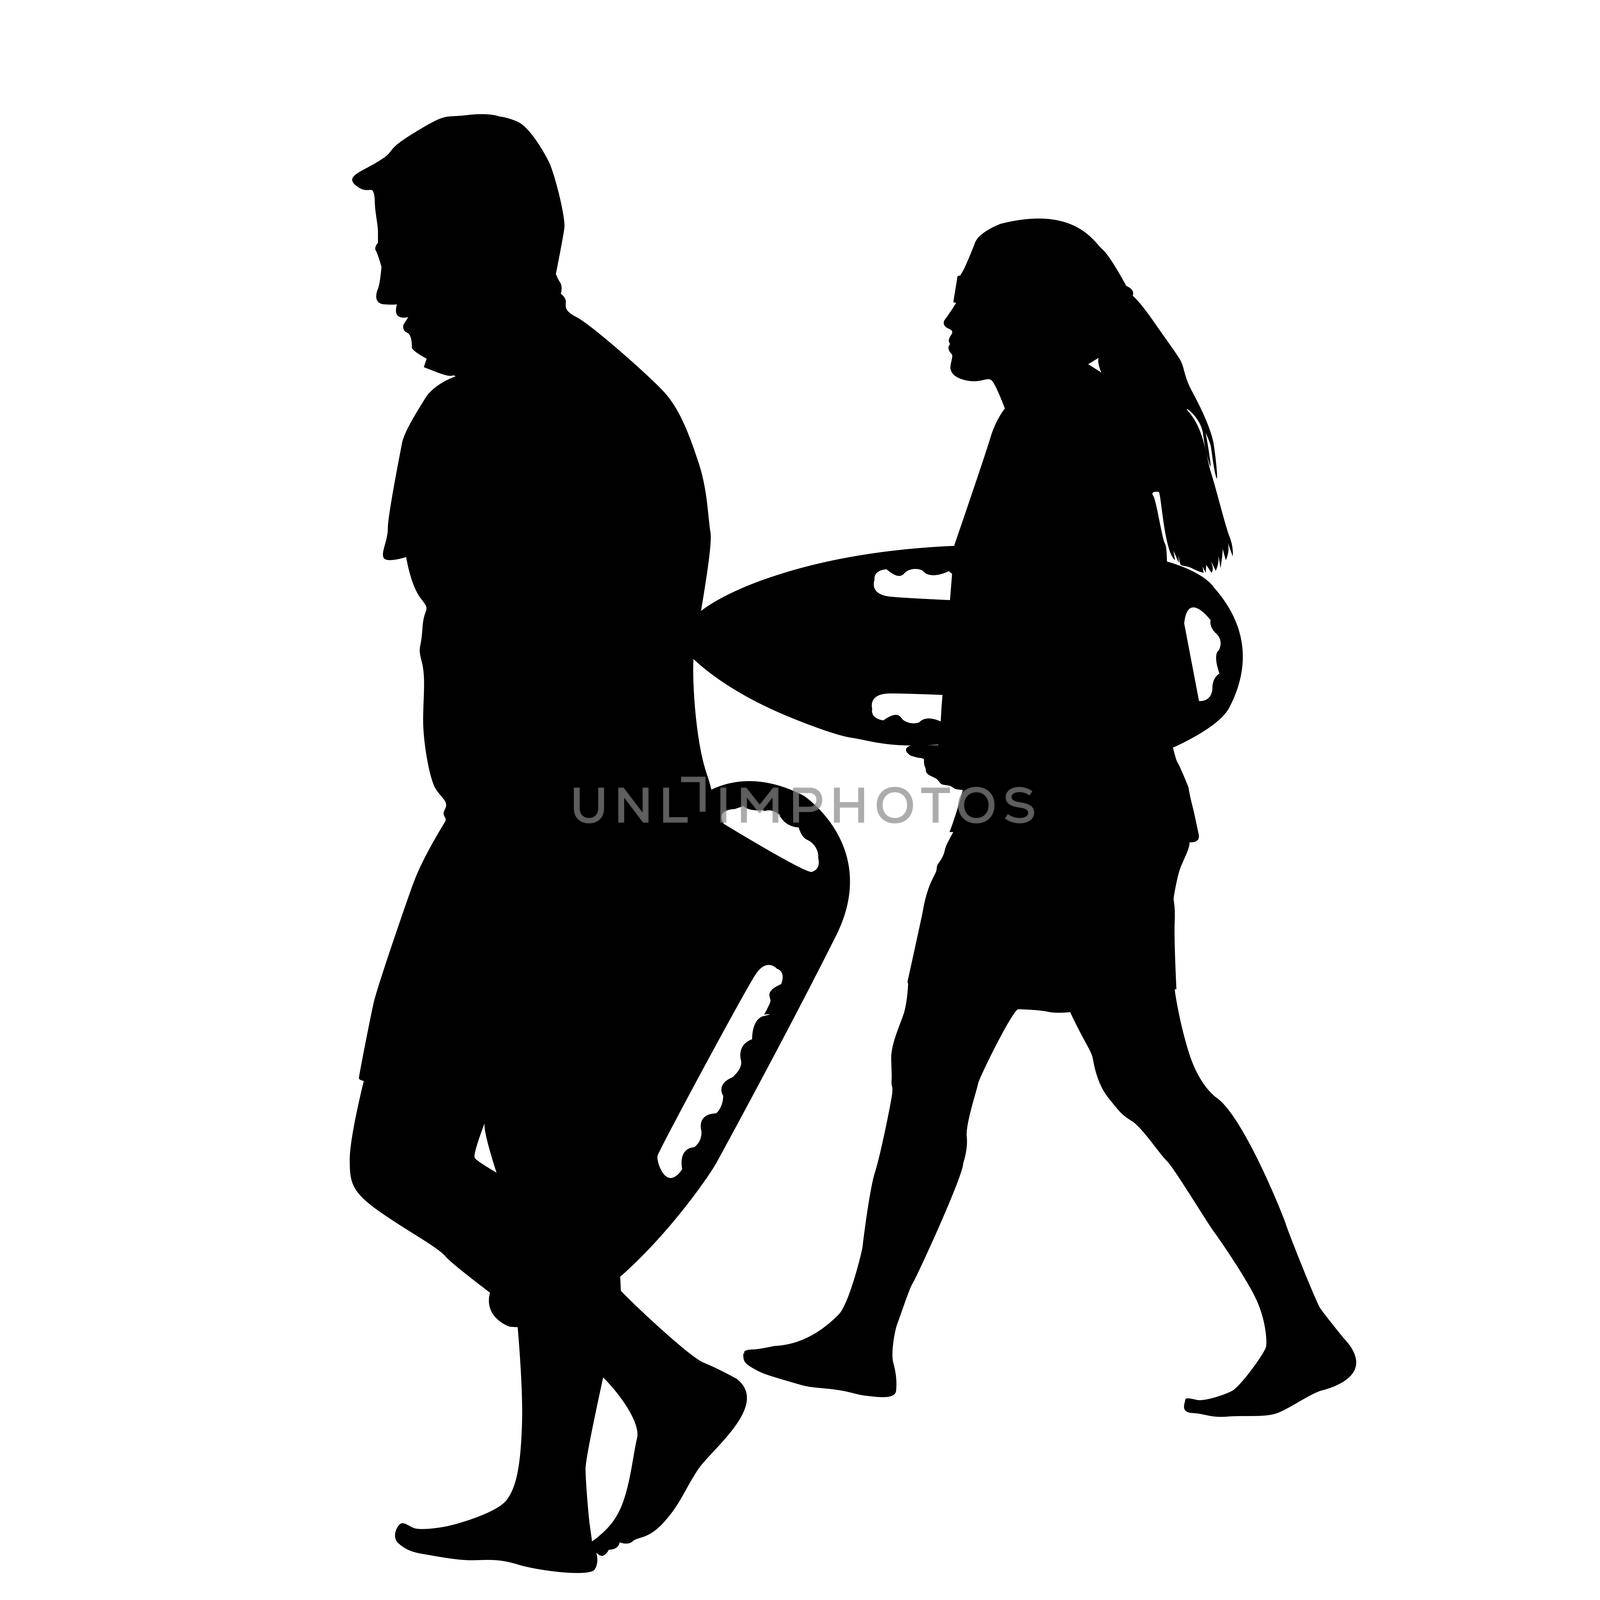 Silhouettes of male and female lifeguards holding rescue cans